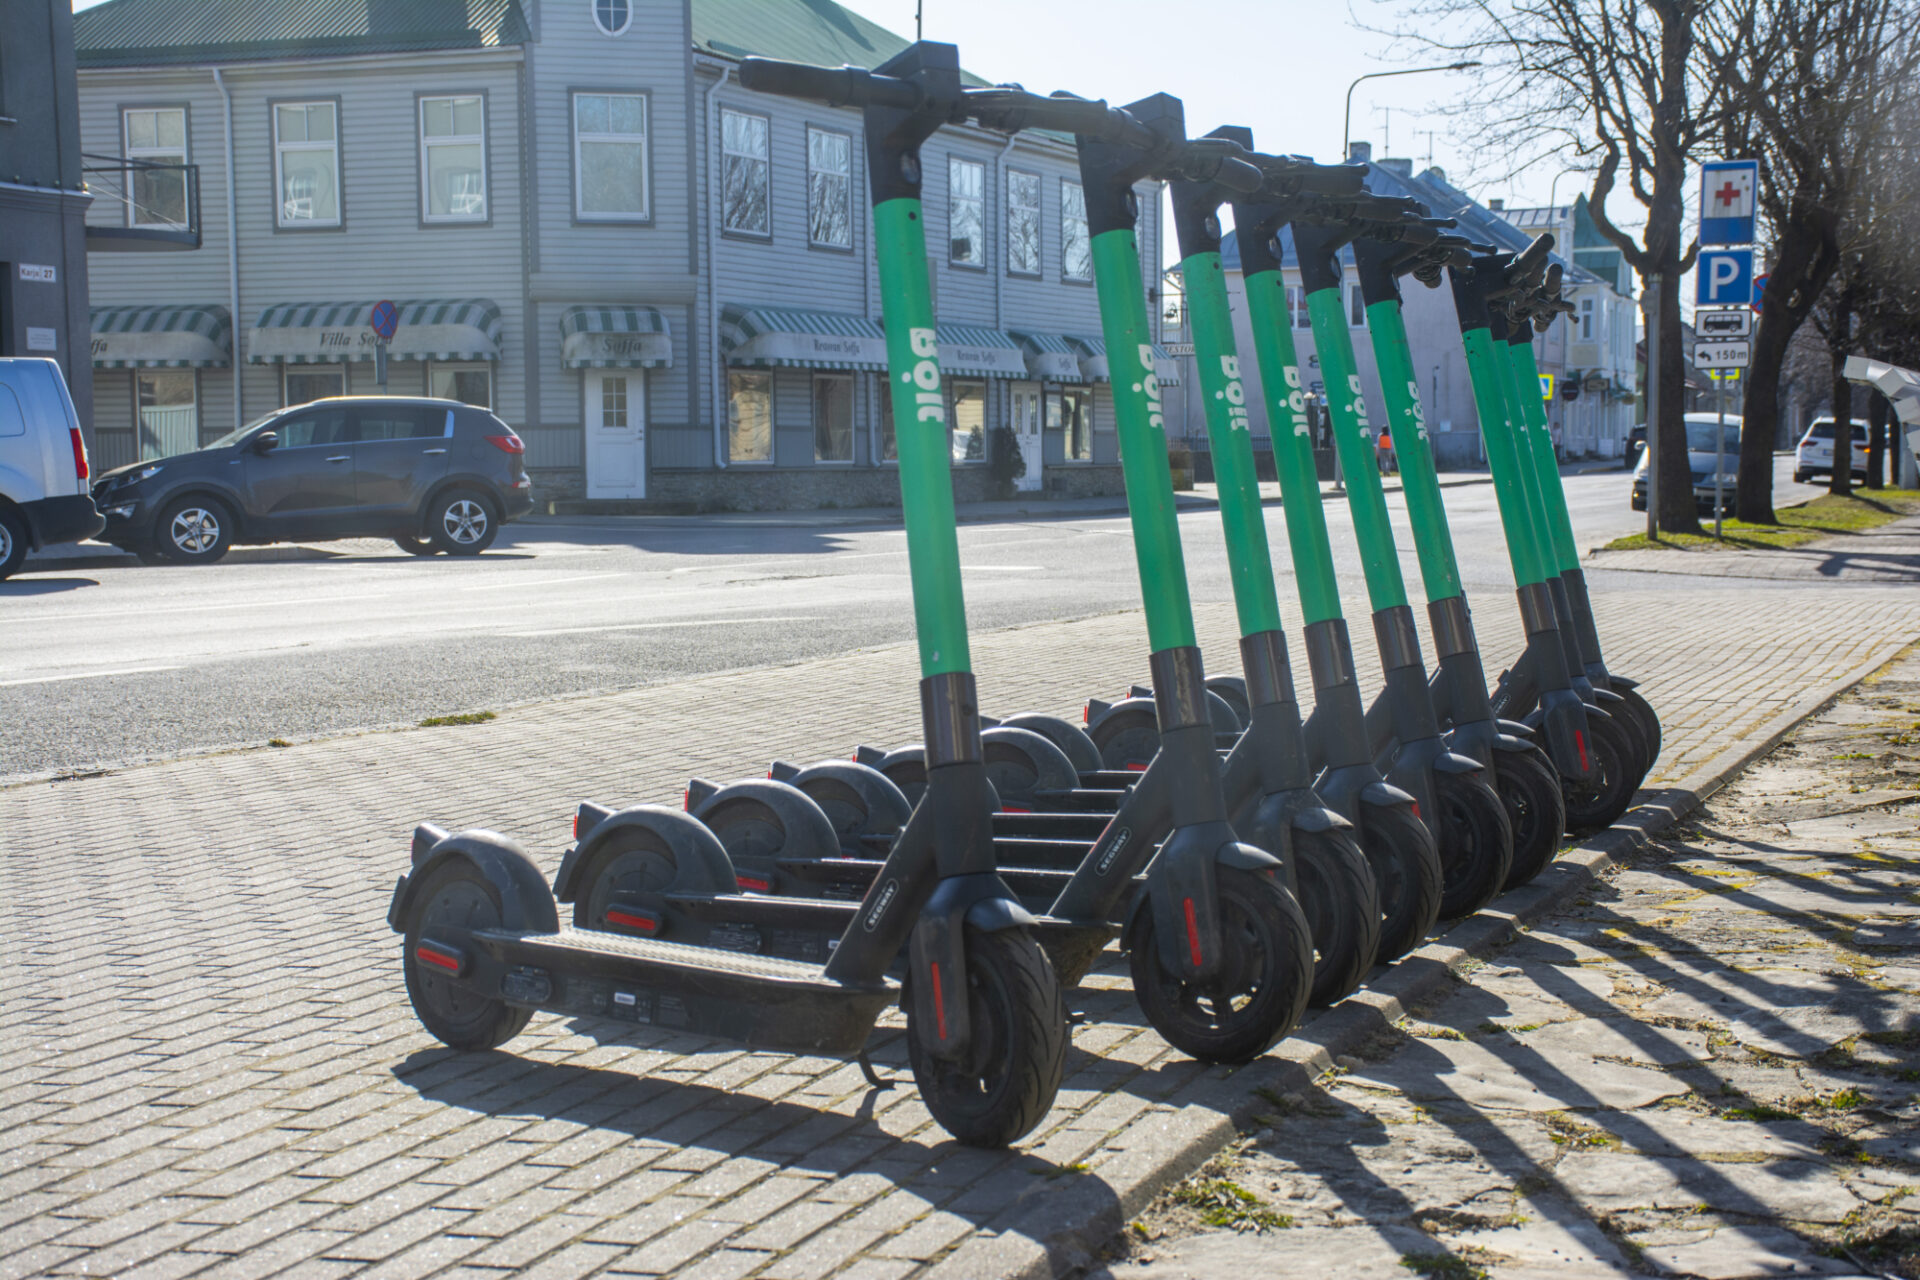 Rental scooters will hit the streets in the coming weeks - Lääne Elu - Archyde